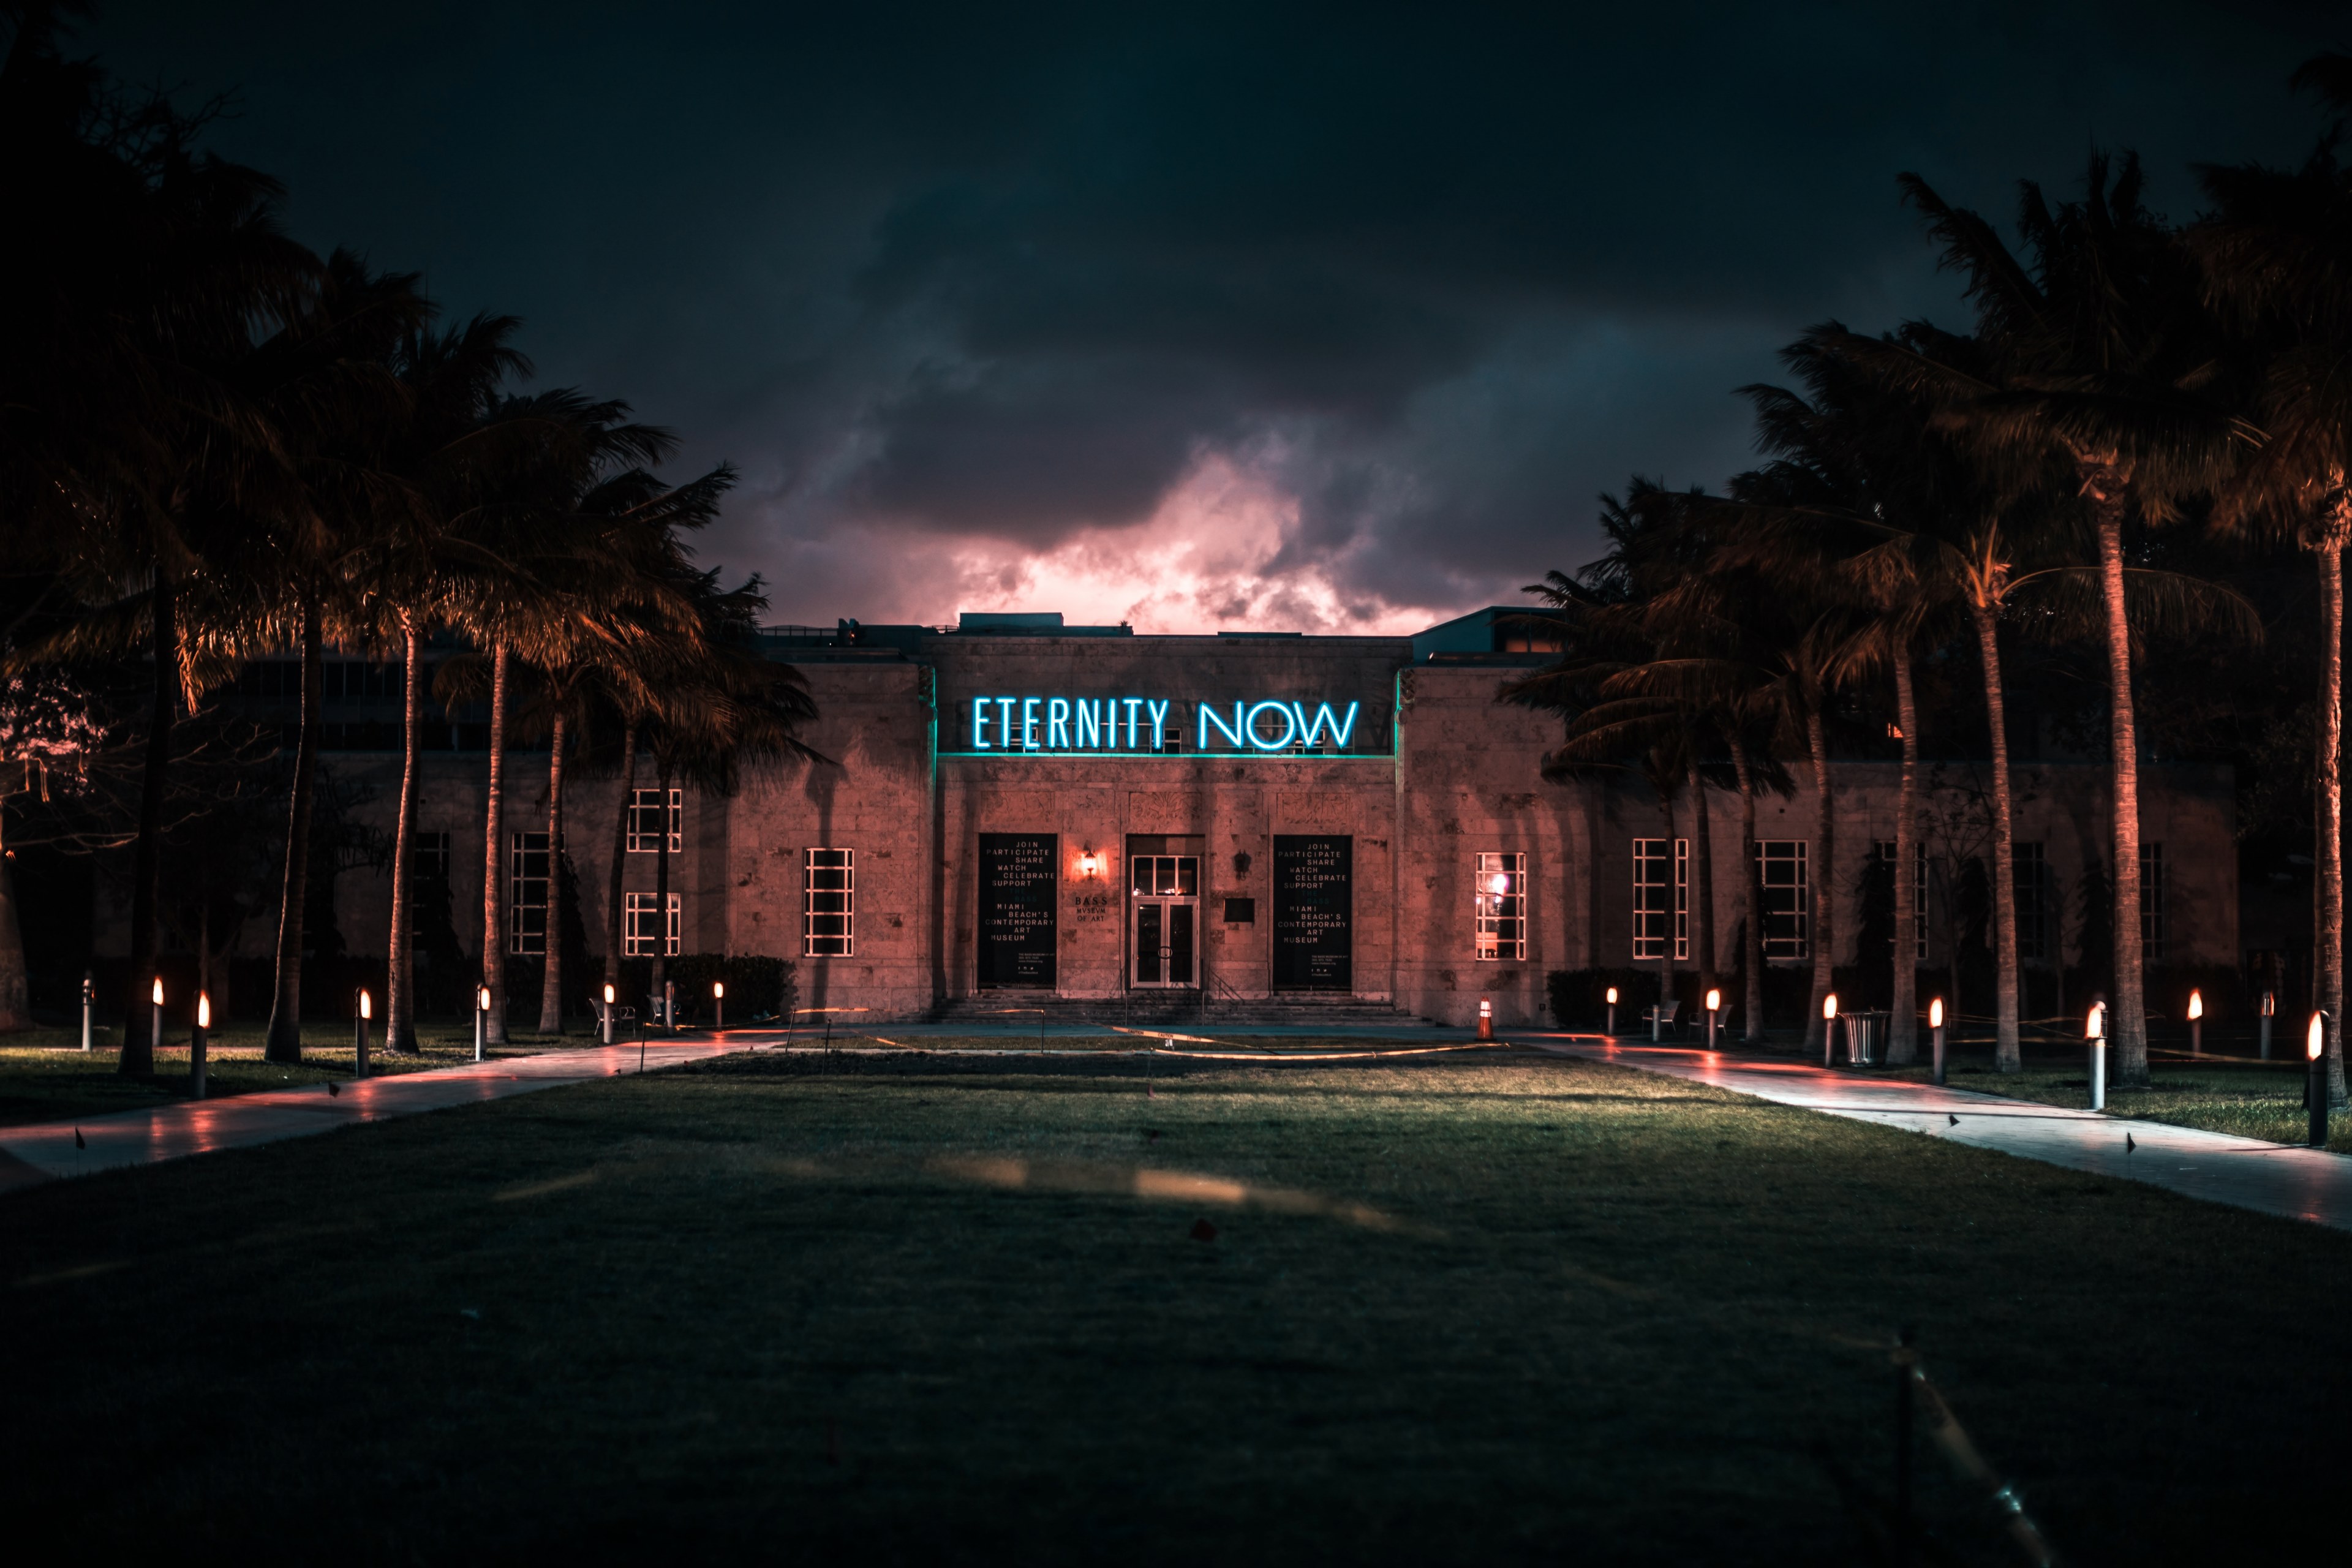 Wallpaper / neon sign on a building by the palm tree rows at miami beach, eternity now 4k wallpaper free download